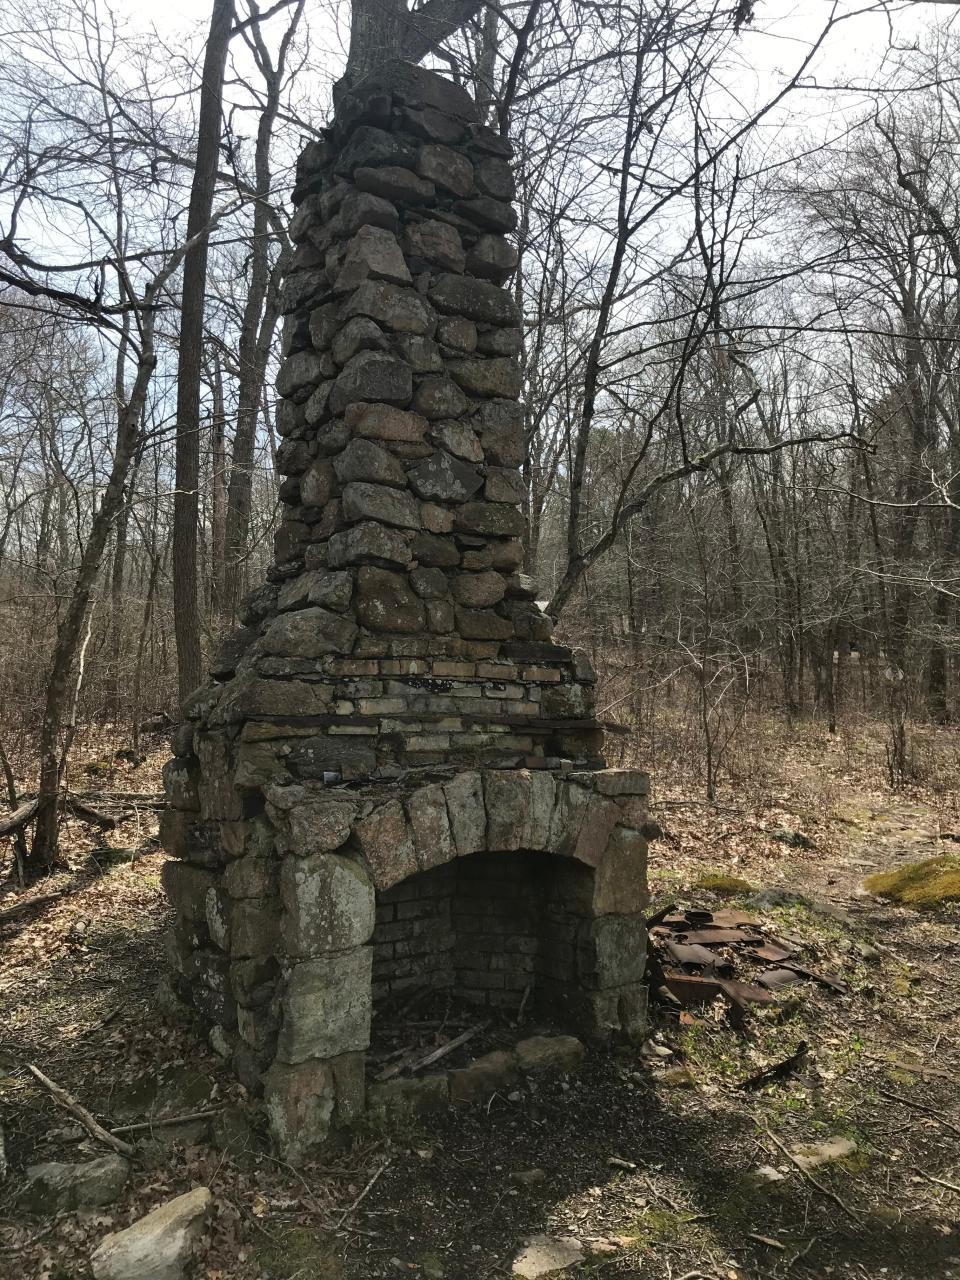 A chimney still stands on land formerly owned by Stuart Cruickshank, who sold 21 acres to the Girl Scouts in 1941 to start Camp Wahaneeta.